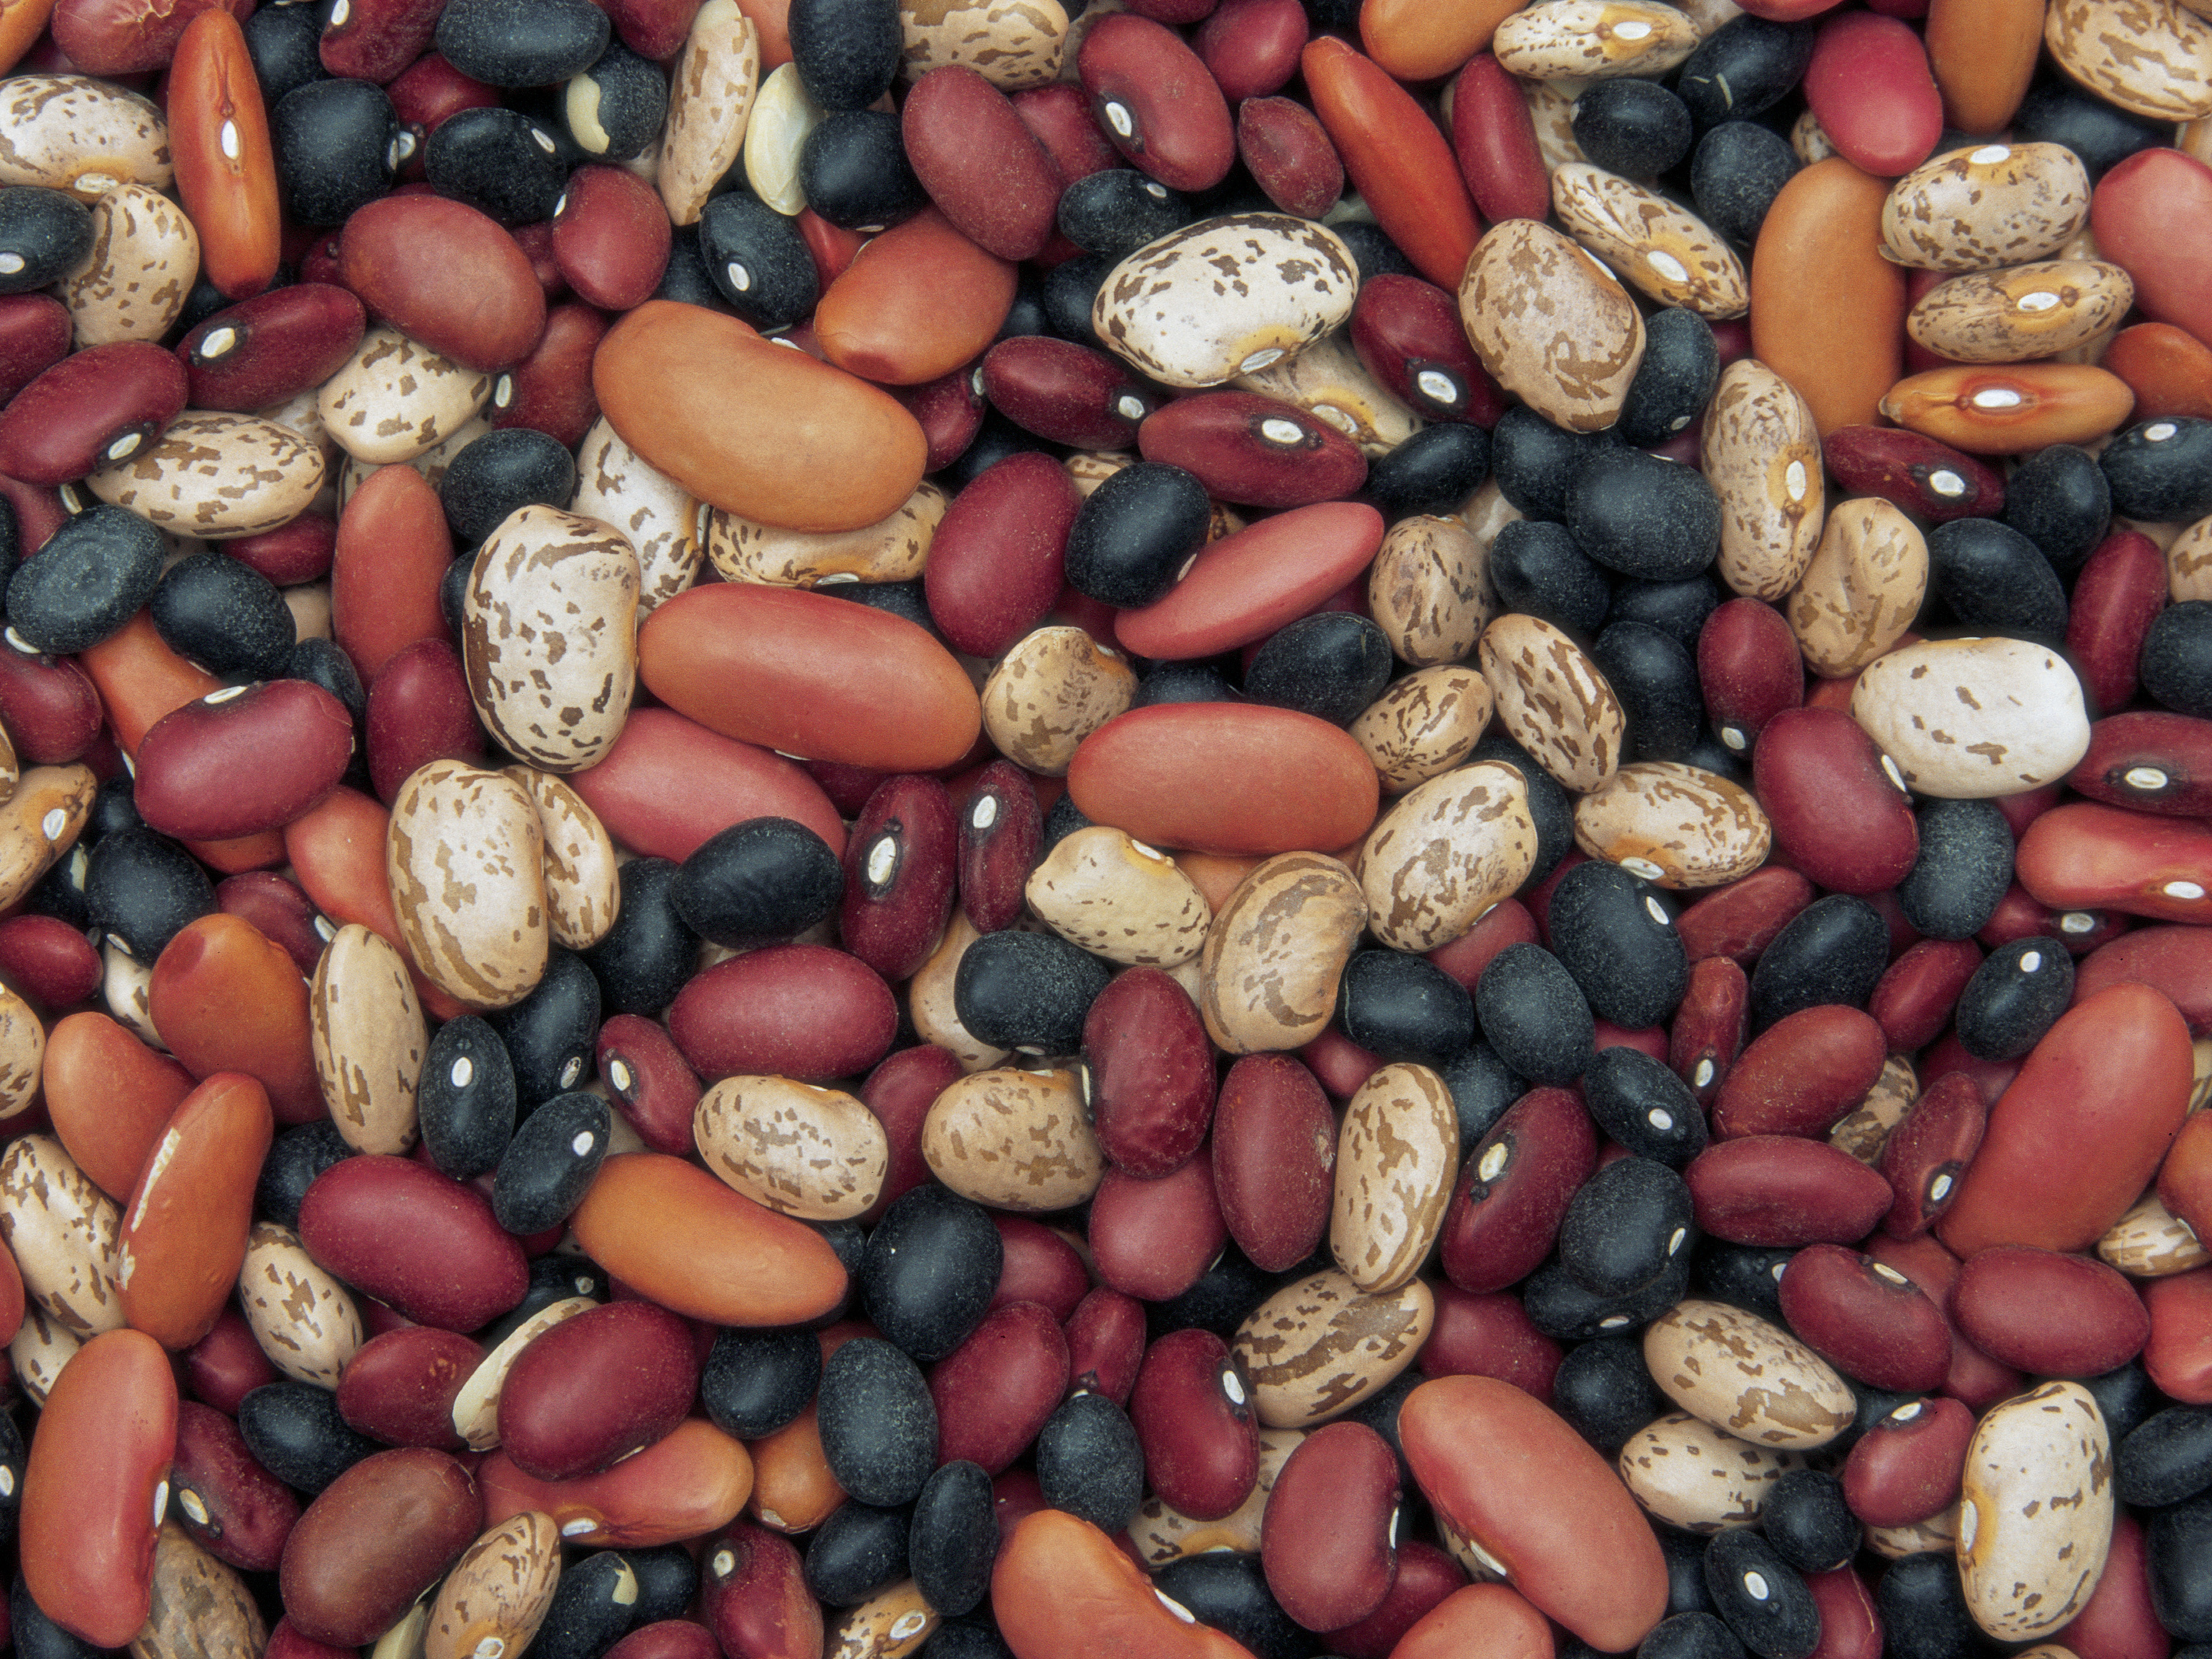 What is the way to remove gas from pinto beans?